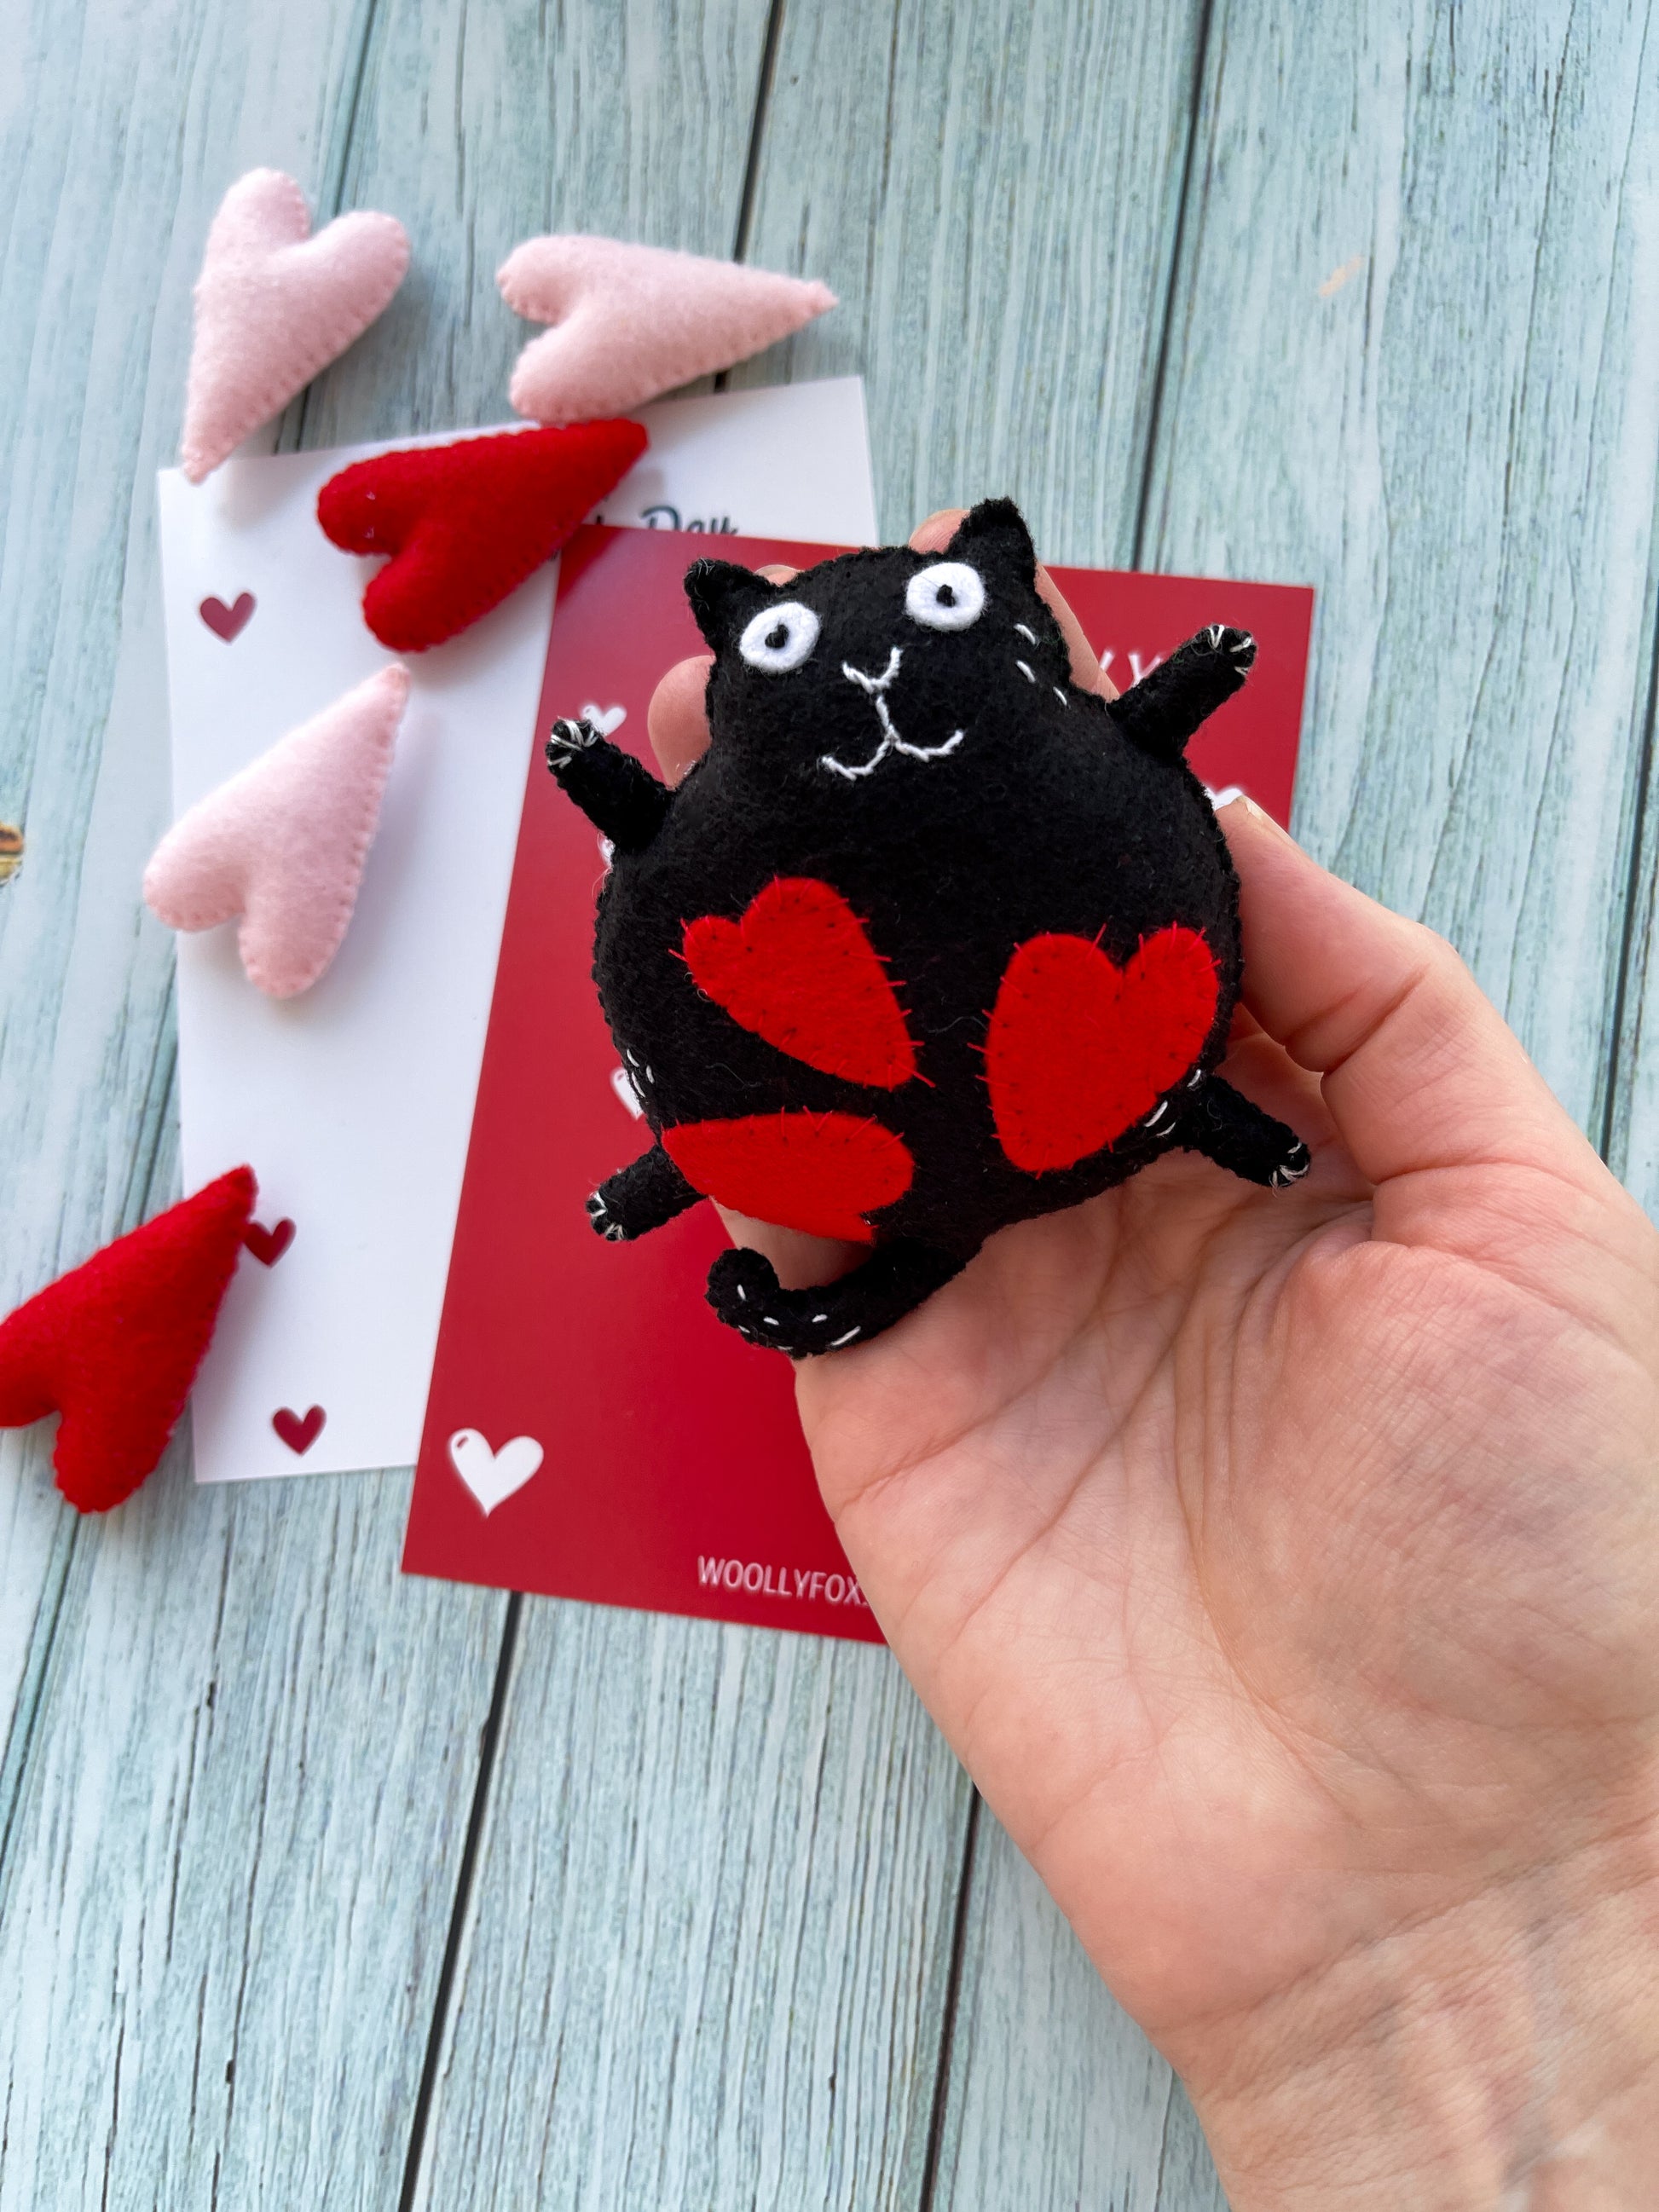 Funny black cat Valentine’s Day card | personalised card